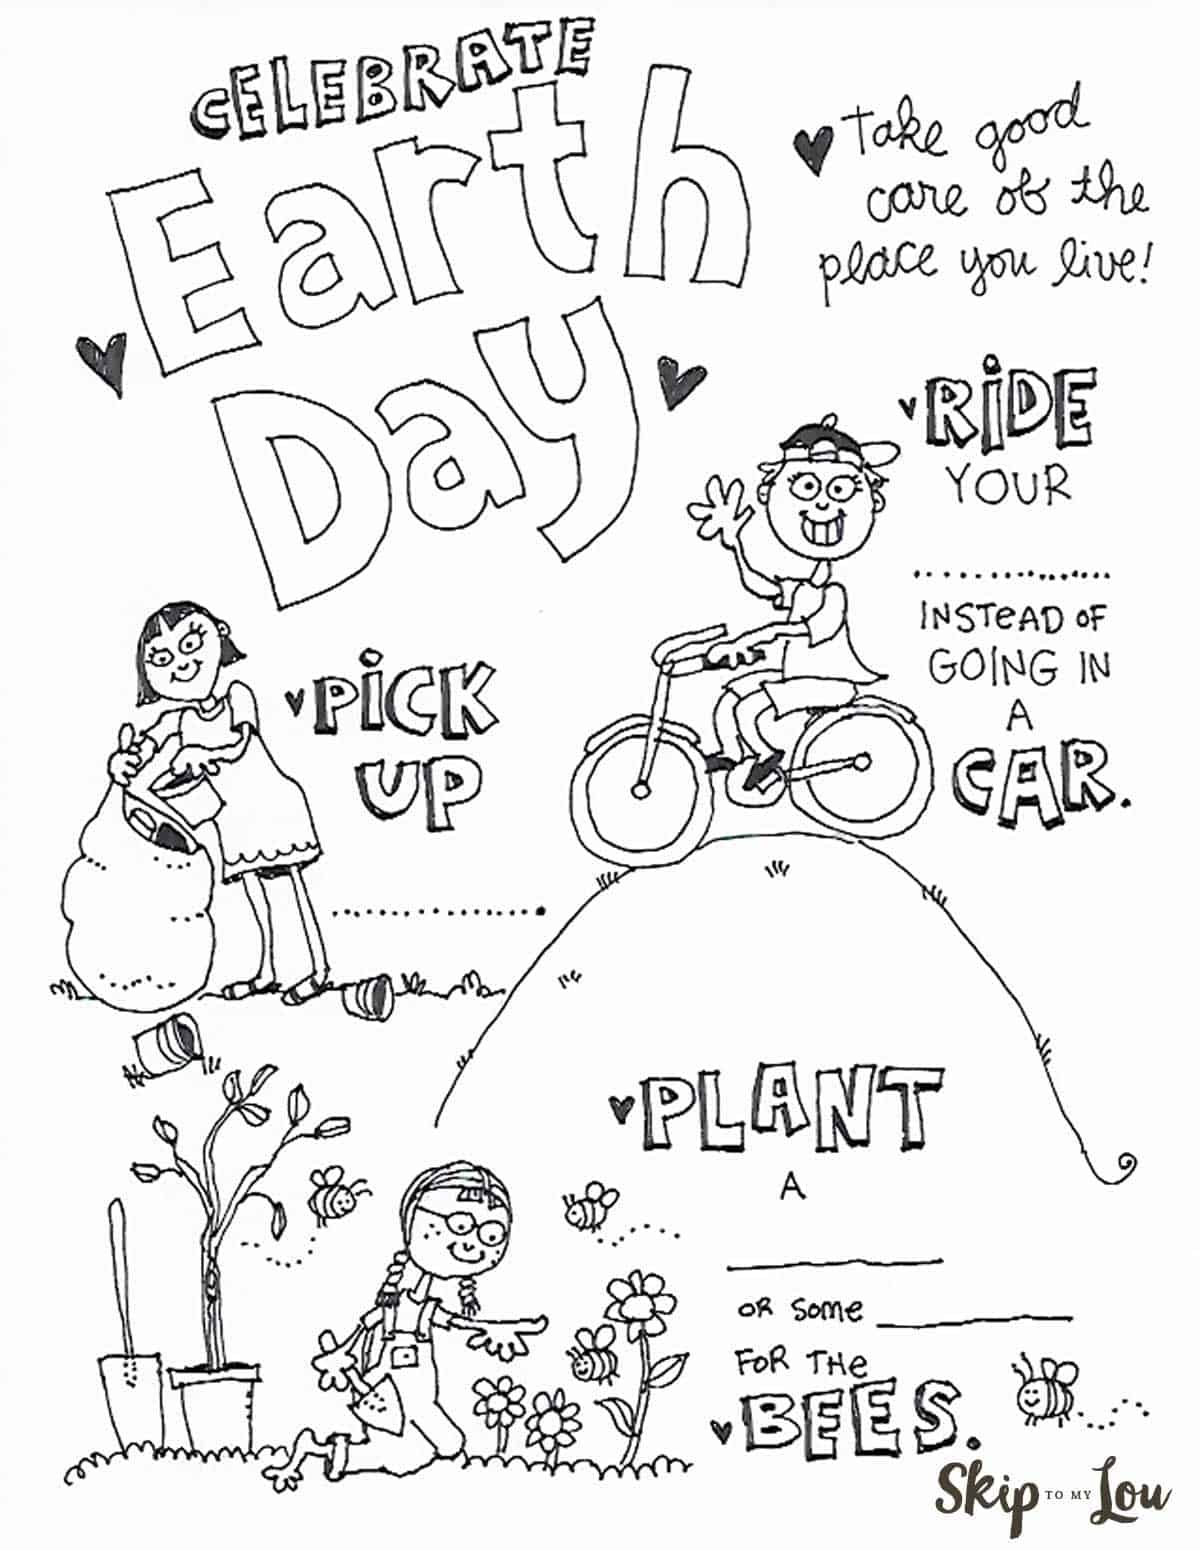 earth-day-activities-free-printable-web-these-free-earth-day-activity